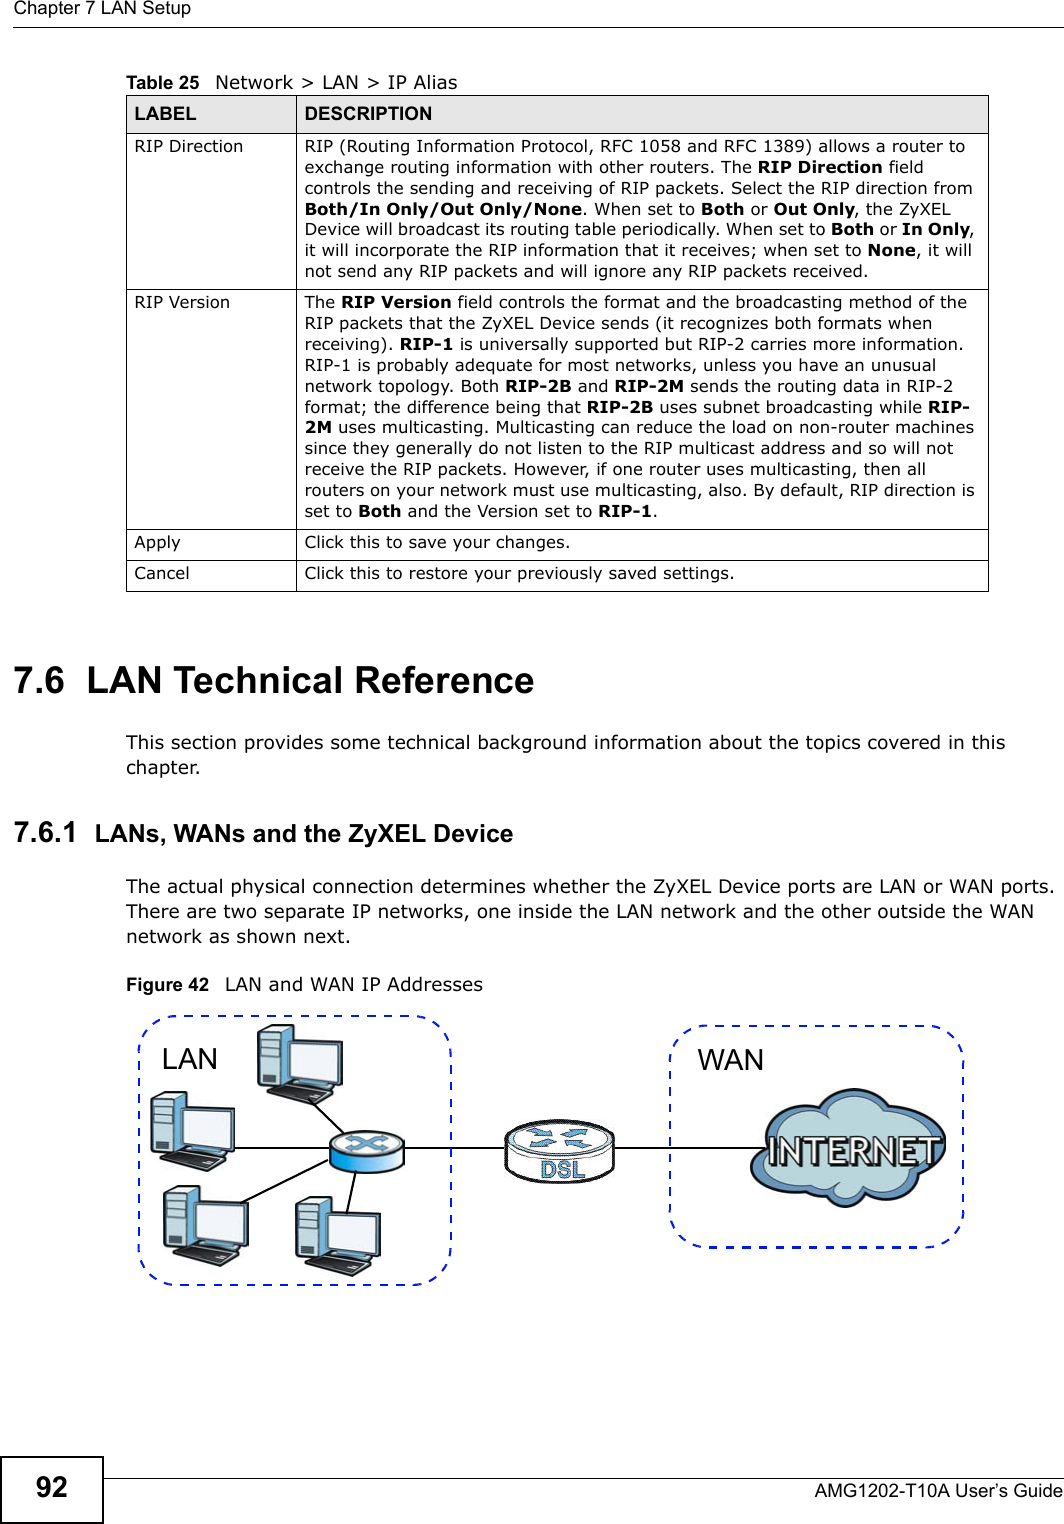 Chapter 7 LAN SetupAMG1202-T10A User’s Guide927.6  LAN Technical ReferenceThis section provides some technical background information about the topics covered in this chapter.7.6.1  LANs, WANs and the ZyXEL DeviceThe actual physical connection determines whether the ZyXEL Device ports are LAN or WAN ports. There are two separate IP networks, one inside the LAN network and the other outside the WAN network as shown next.Figure 42   LAN and WAN IP AddressesRIP Direction RIP (Routing Information Protocol, RFC 1058 and RFC 1389) allows a router to exchange routing information with other routers. The RIP Direction field controls the sending and receiving of RIP packets. Select the RIP direction from Both/In Only/Out Only/None. When set to Both or Out Only, the ZyXEL Device will broadcast its routing table periodically. When set to Both or In Only, it will incorporate the RIP information that it receives; when set to None, it will not send any RIP packets and will ignore any RIP packets received.RIP Version The RIP Version field controls the format and the broadcasting method of the RIP packets that the ZyXEL Device sends (it recognizes both formats when receiving). RIP-1 is universally supported but RIP-2 carries more information. RIP-1 is probably adequate for most networks, unless you have an unusual network topology. Both RIP-2B and RIP-2M sends the routing data in RIP-2 format; the difference being that RIP-2B uses subnet broadcasting while RIP-2M uses multicasting. Multicasting can reduce the load on non-router machines since they generally do not listen to the RIP multicast address and so will not receive the RIP packets. However, if one router uses multicasting, then all routers on your network must use multicasting, also. By default, RIP direction is set to Both and the Version set to RIP-1.Apply Click this to save your changes.Cancel Click this to restore your previously saved settings.Table 25   Network &gt; LAN &gt; IP Alias LABEL DESCRIPTIONWANLAN